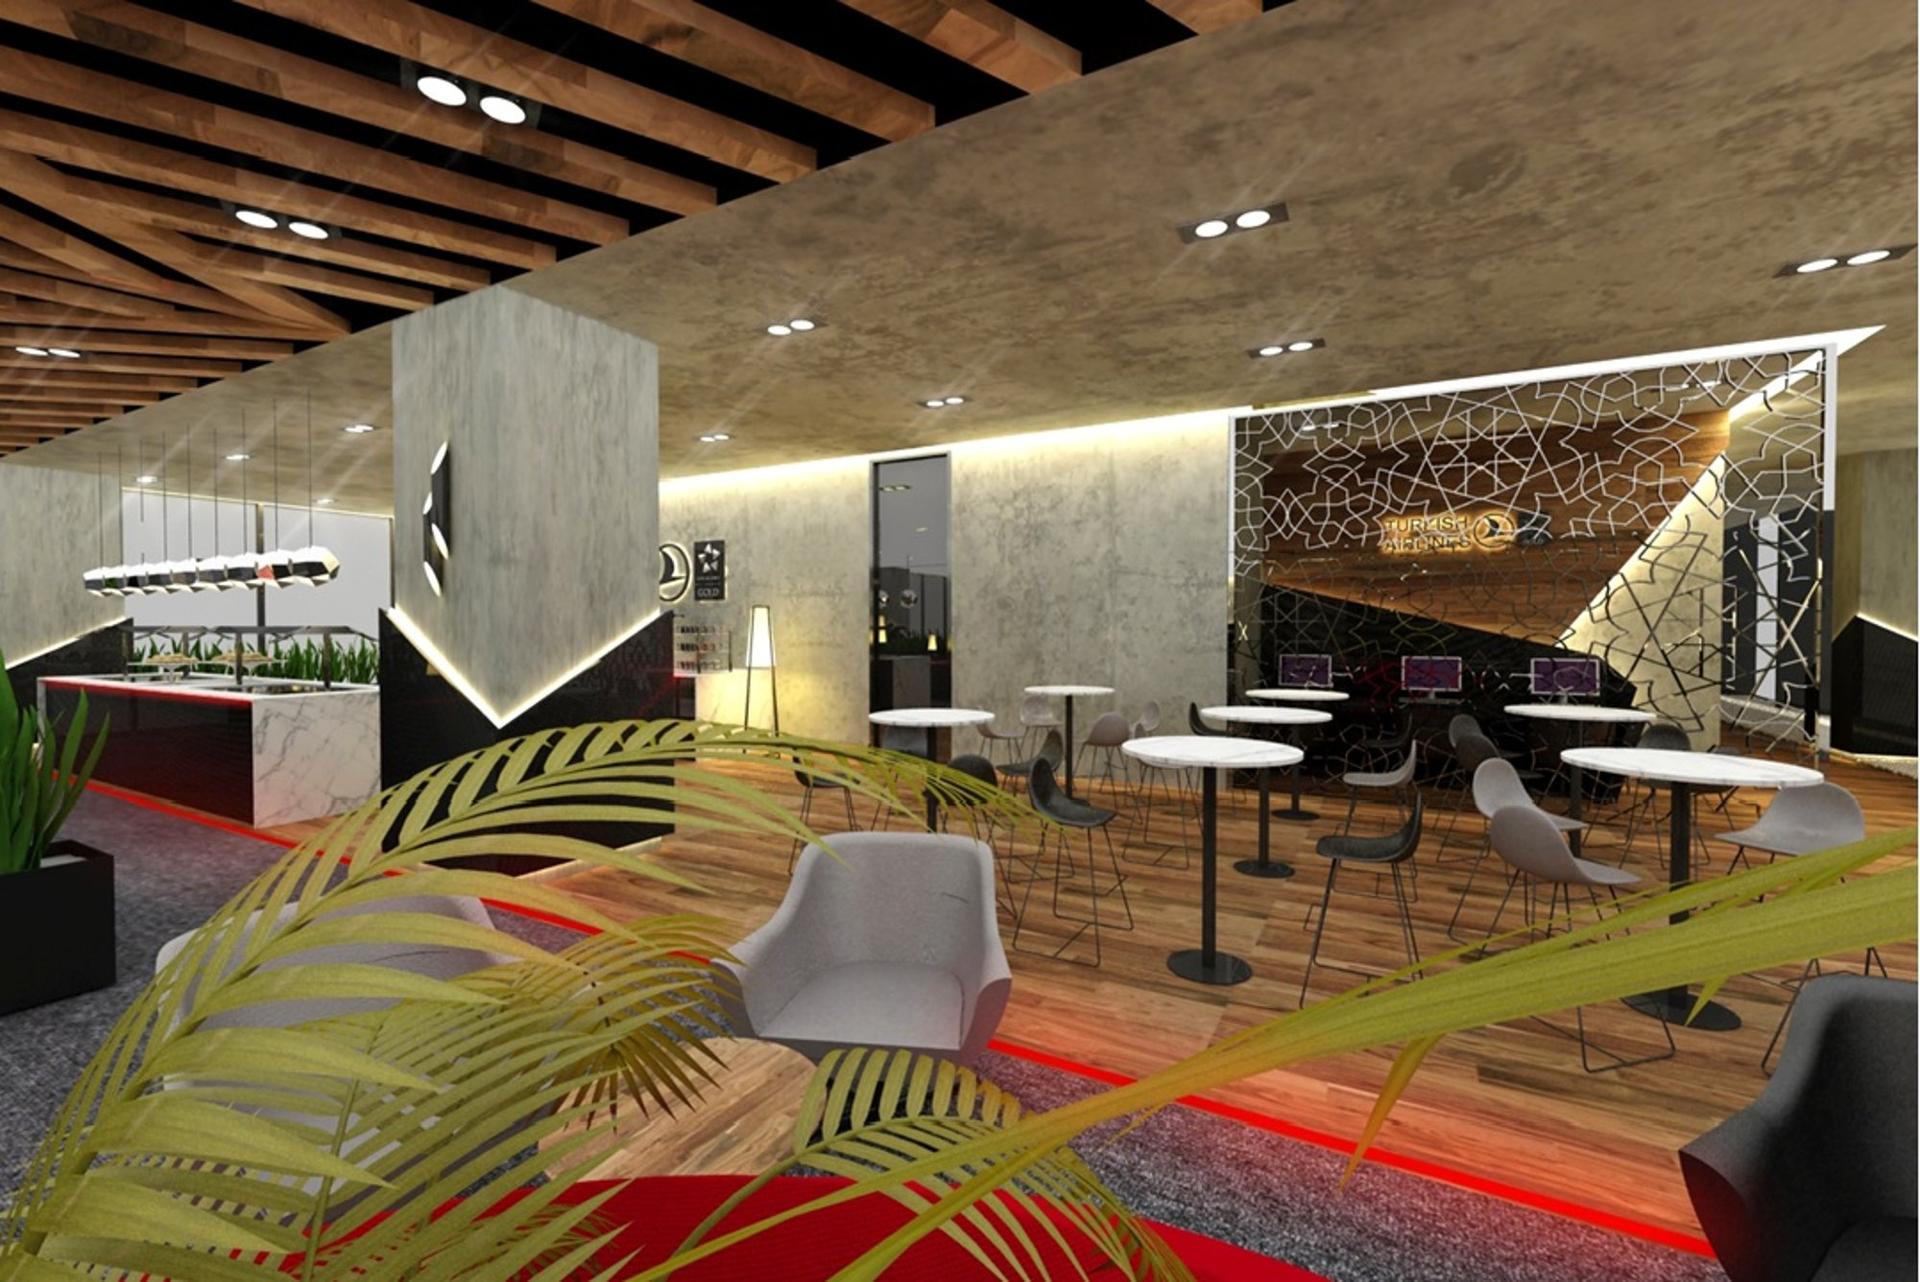 Turkish Airlines CIP Lounge (Business Lounge) image 8 of 27